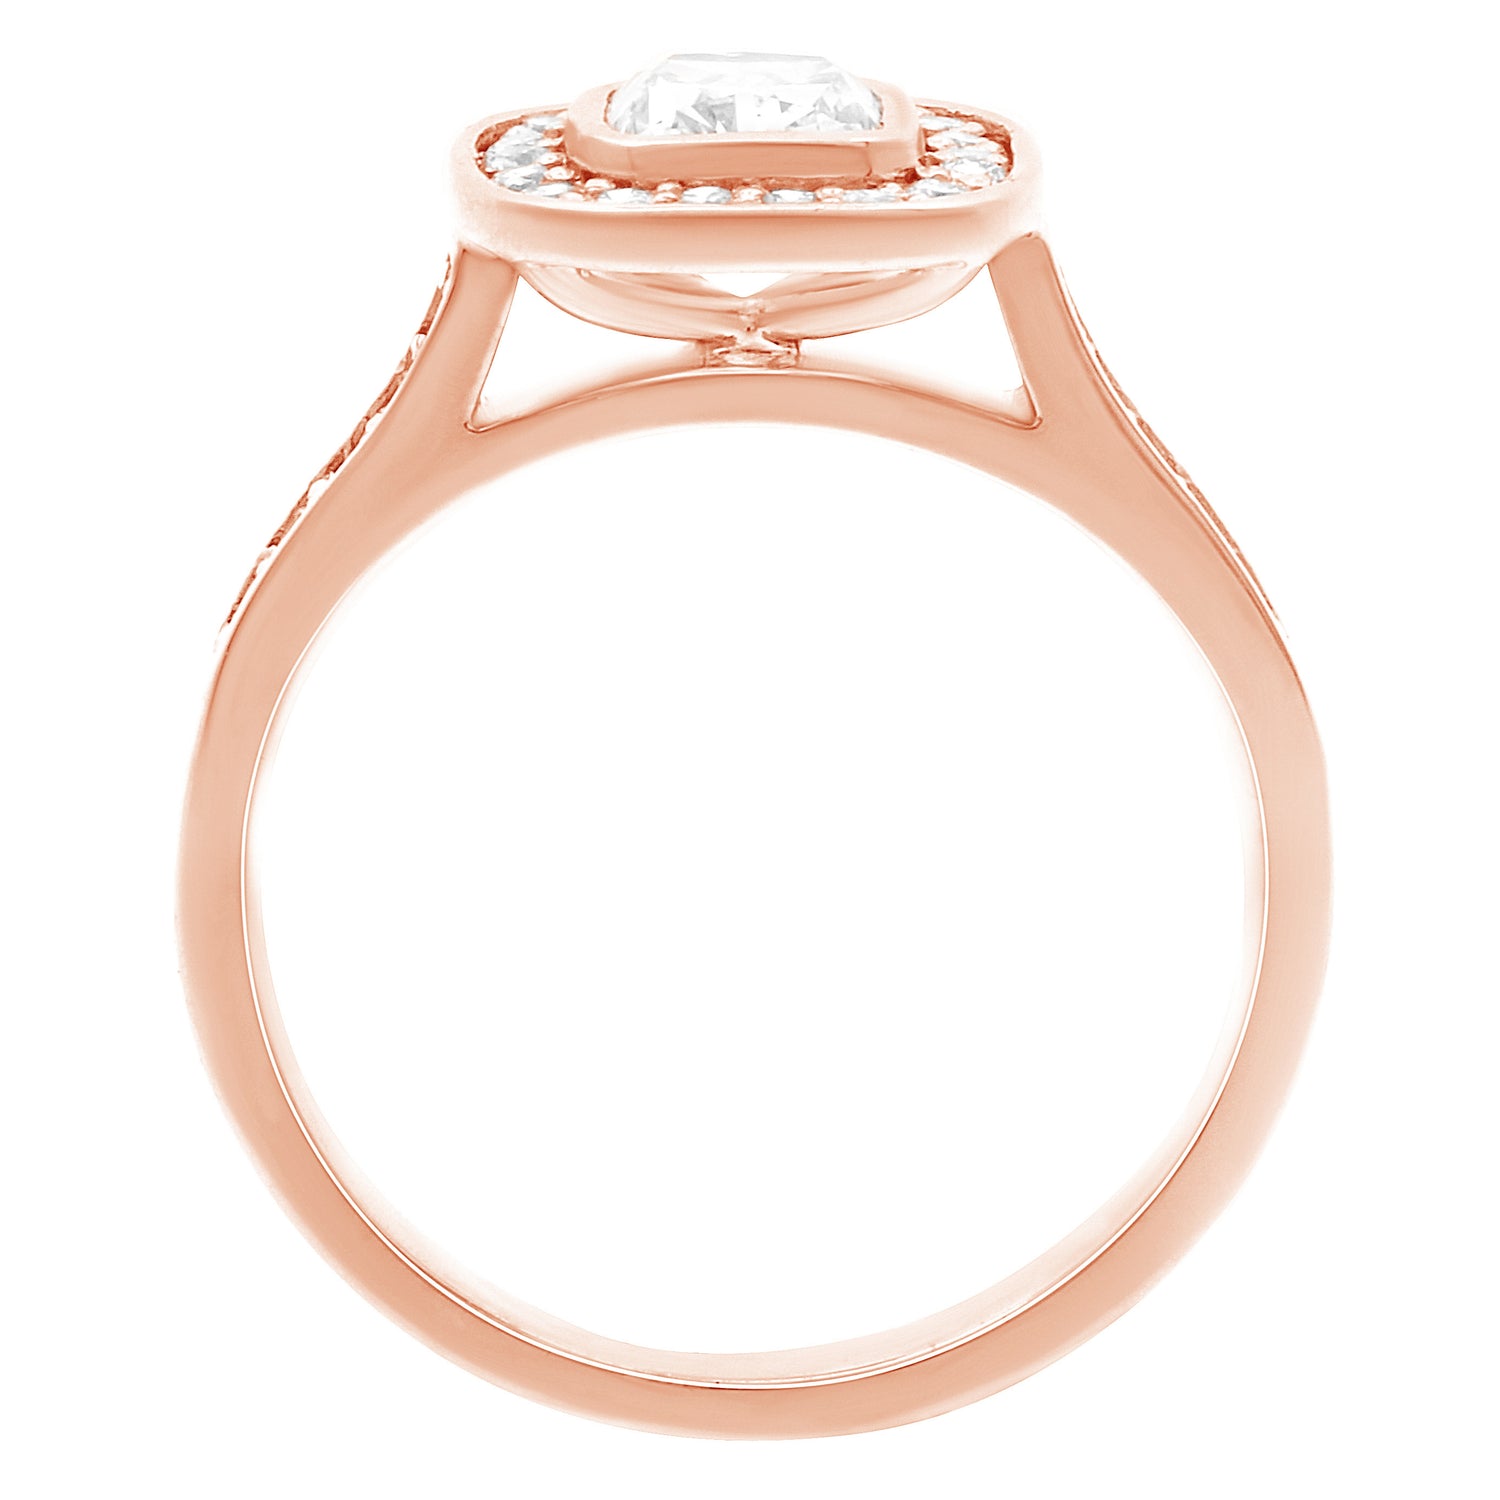 Cushion Cut Bezel Diamond Ring in rose gold in upright position